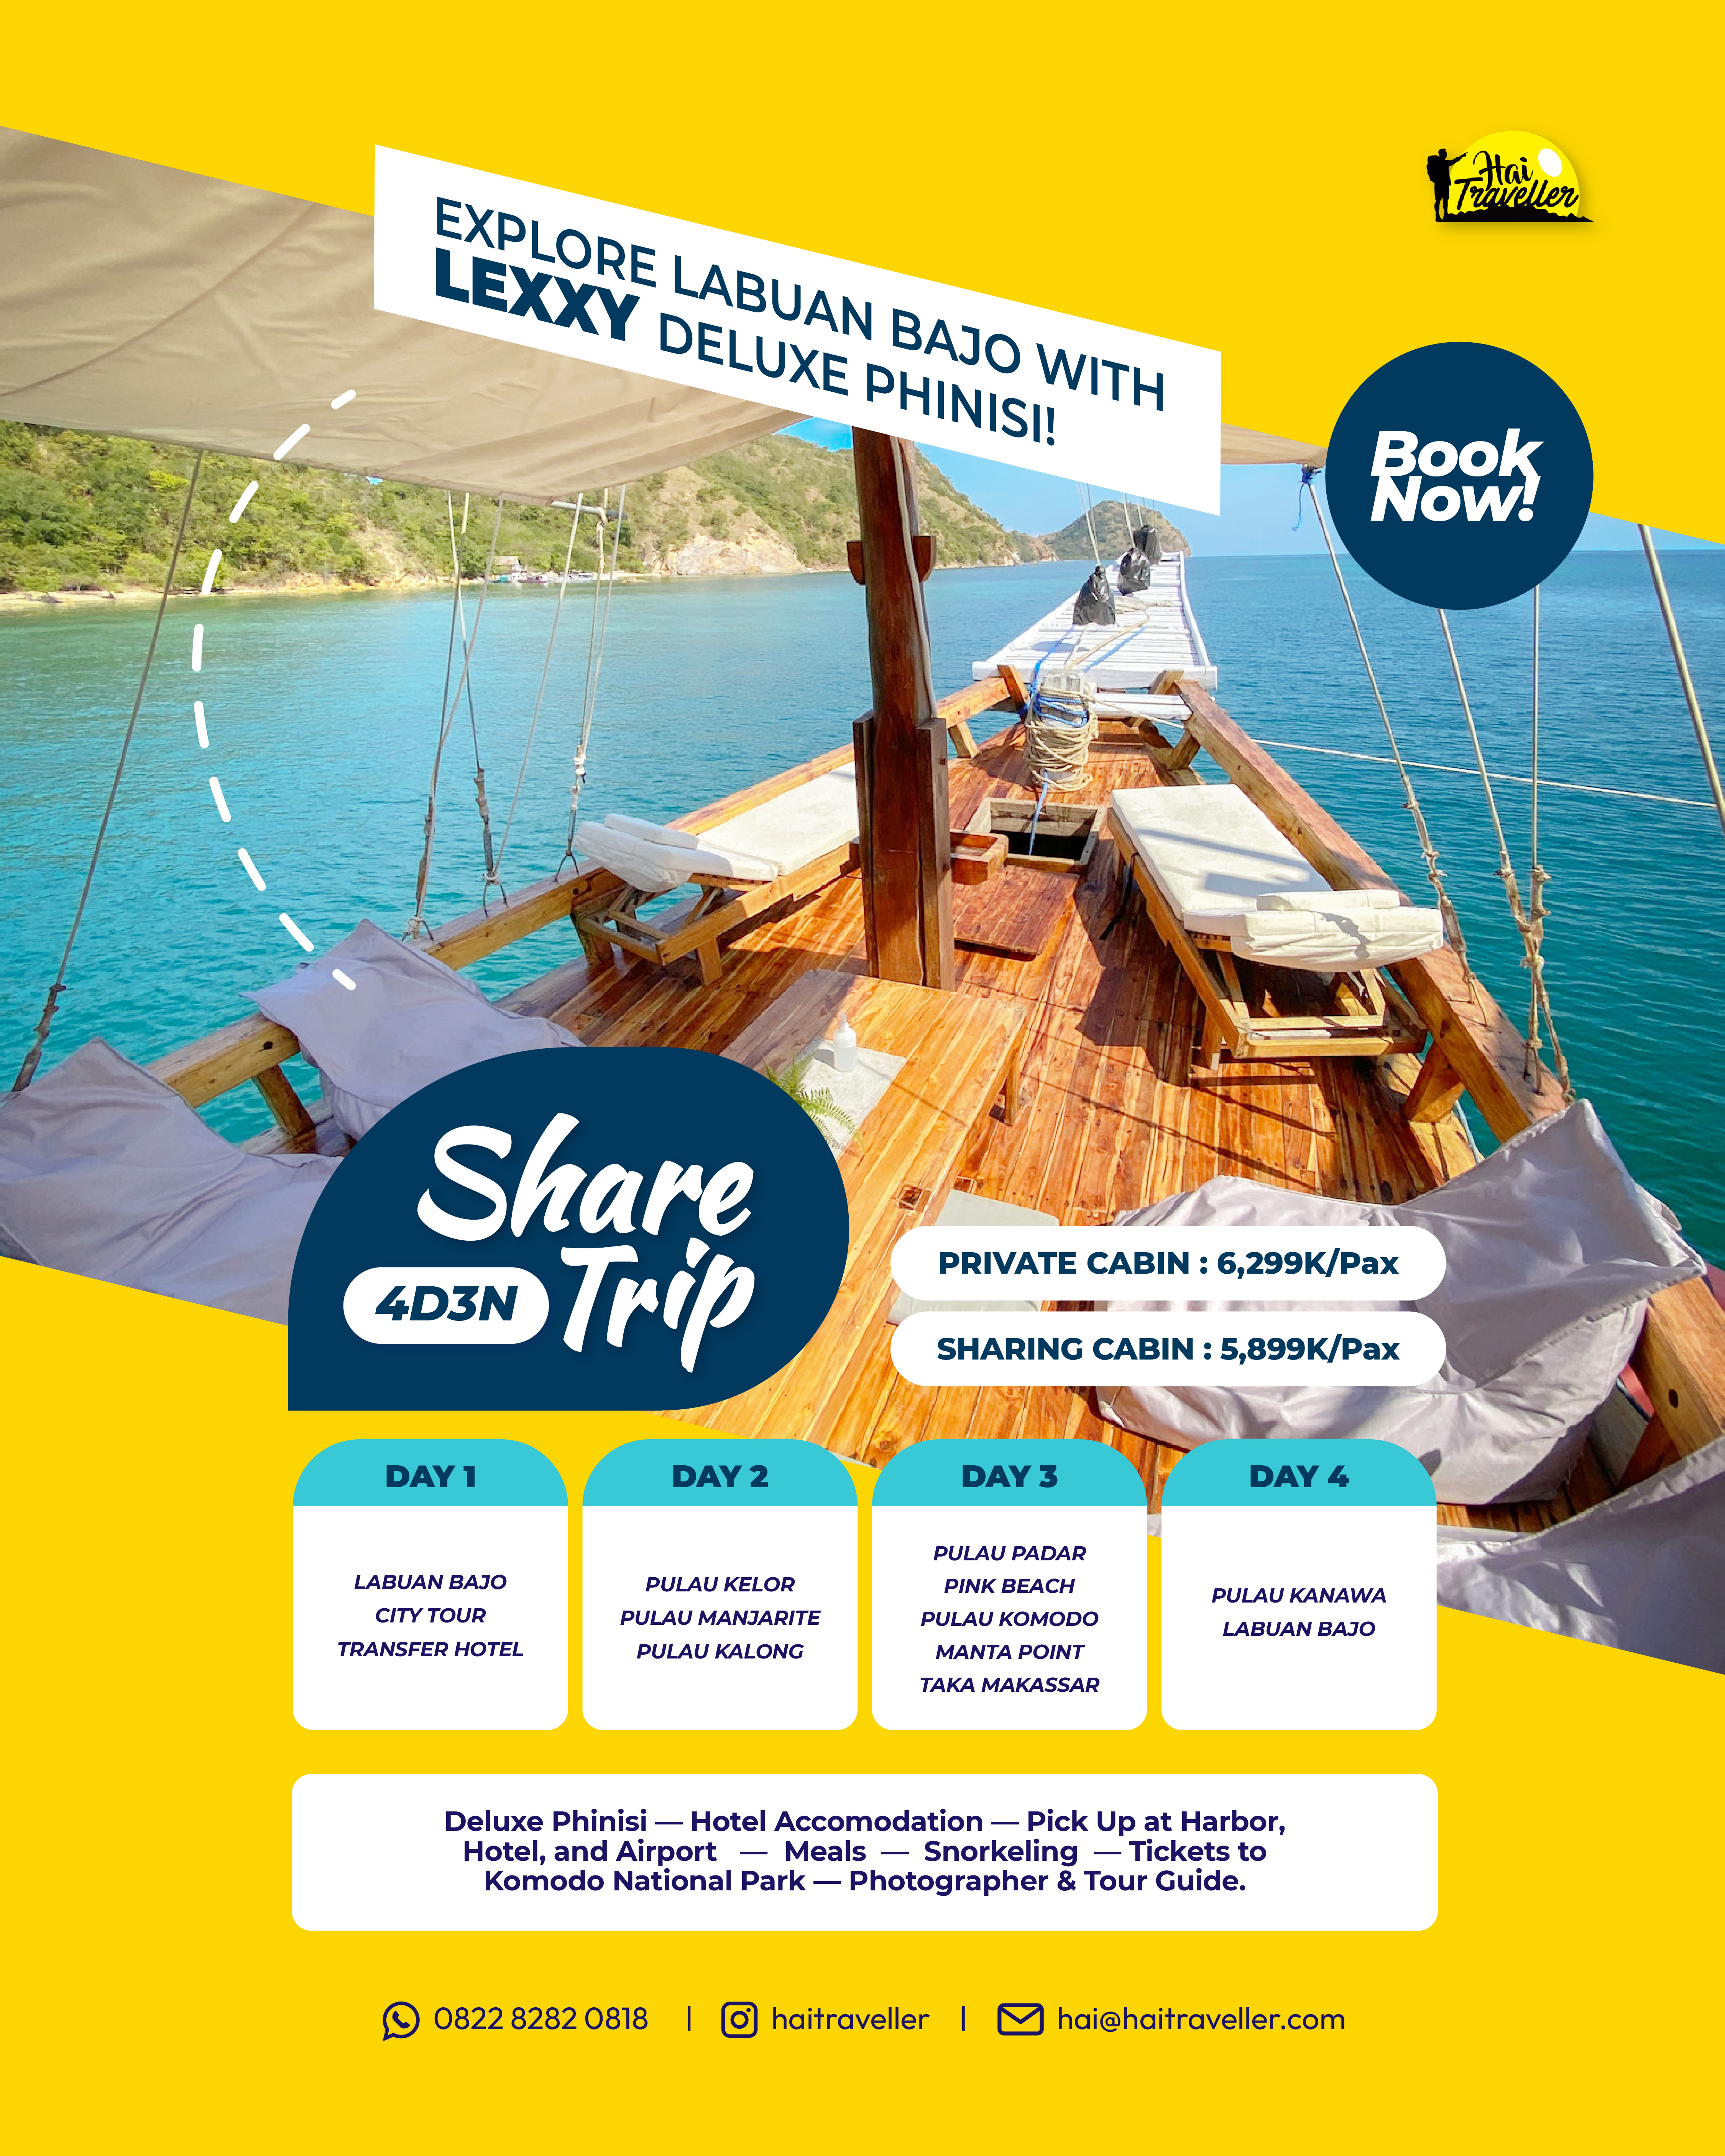 4D3N Share Trip Labuan Bajo by LEXXY Deluxe Phinisi